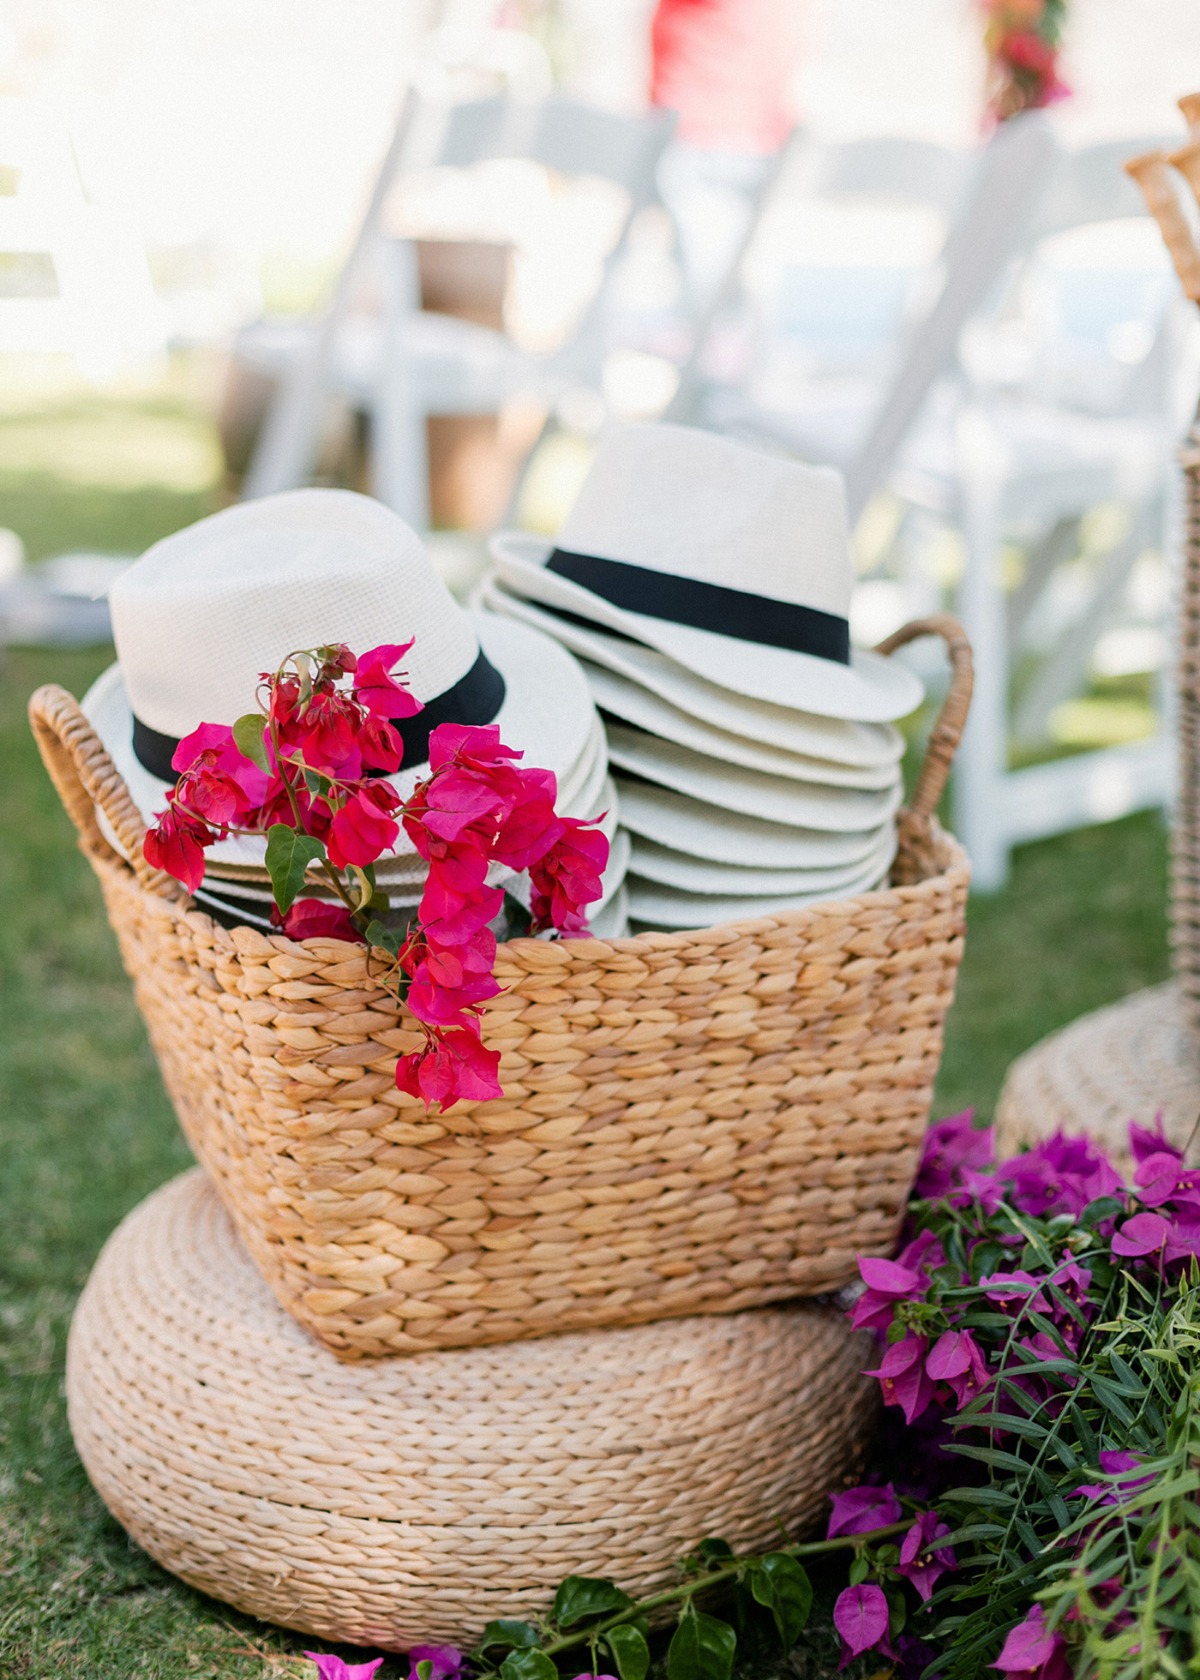 wooden fans, panama hats and parasols to cool off during the ceremony